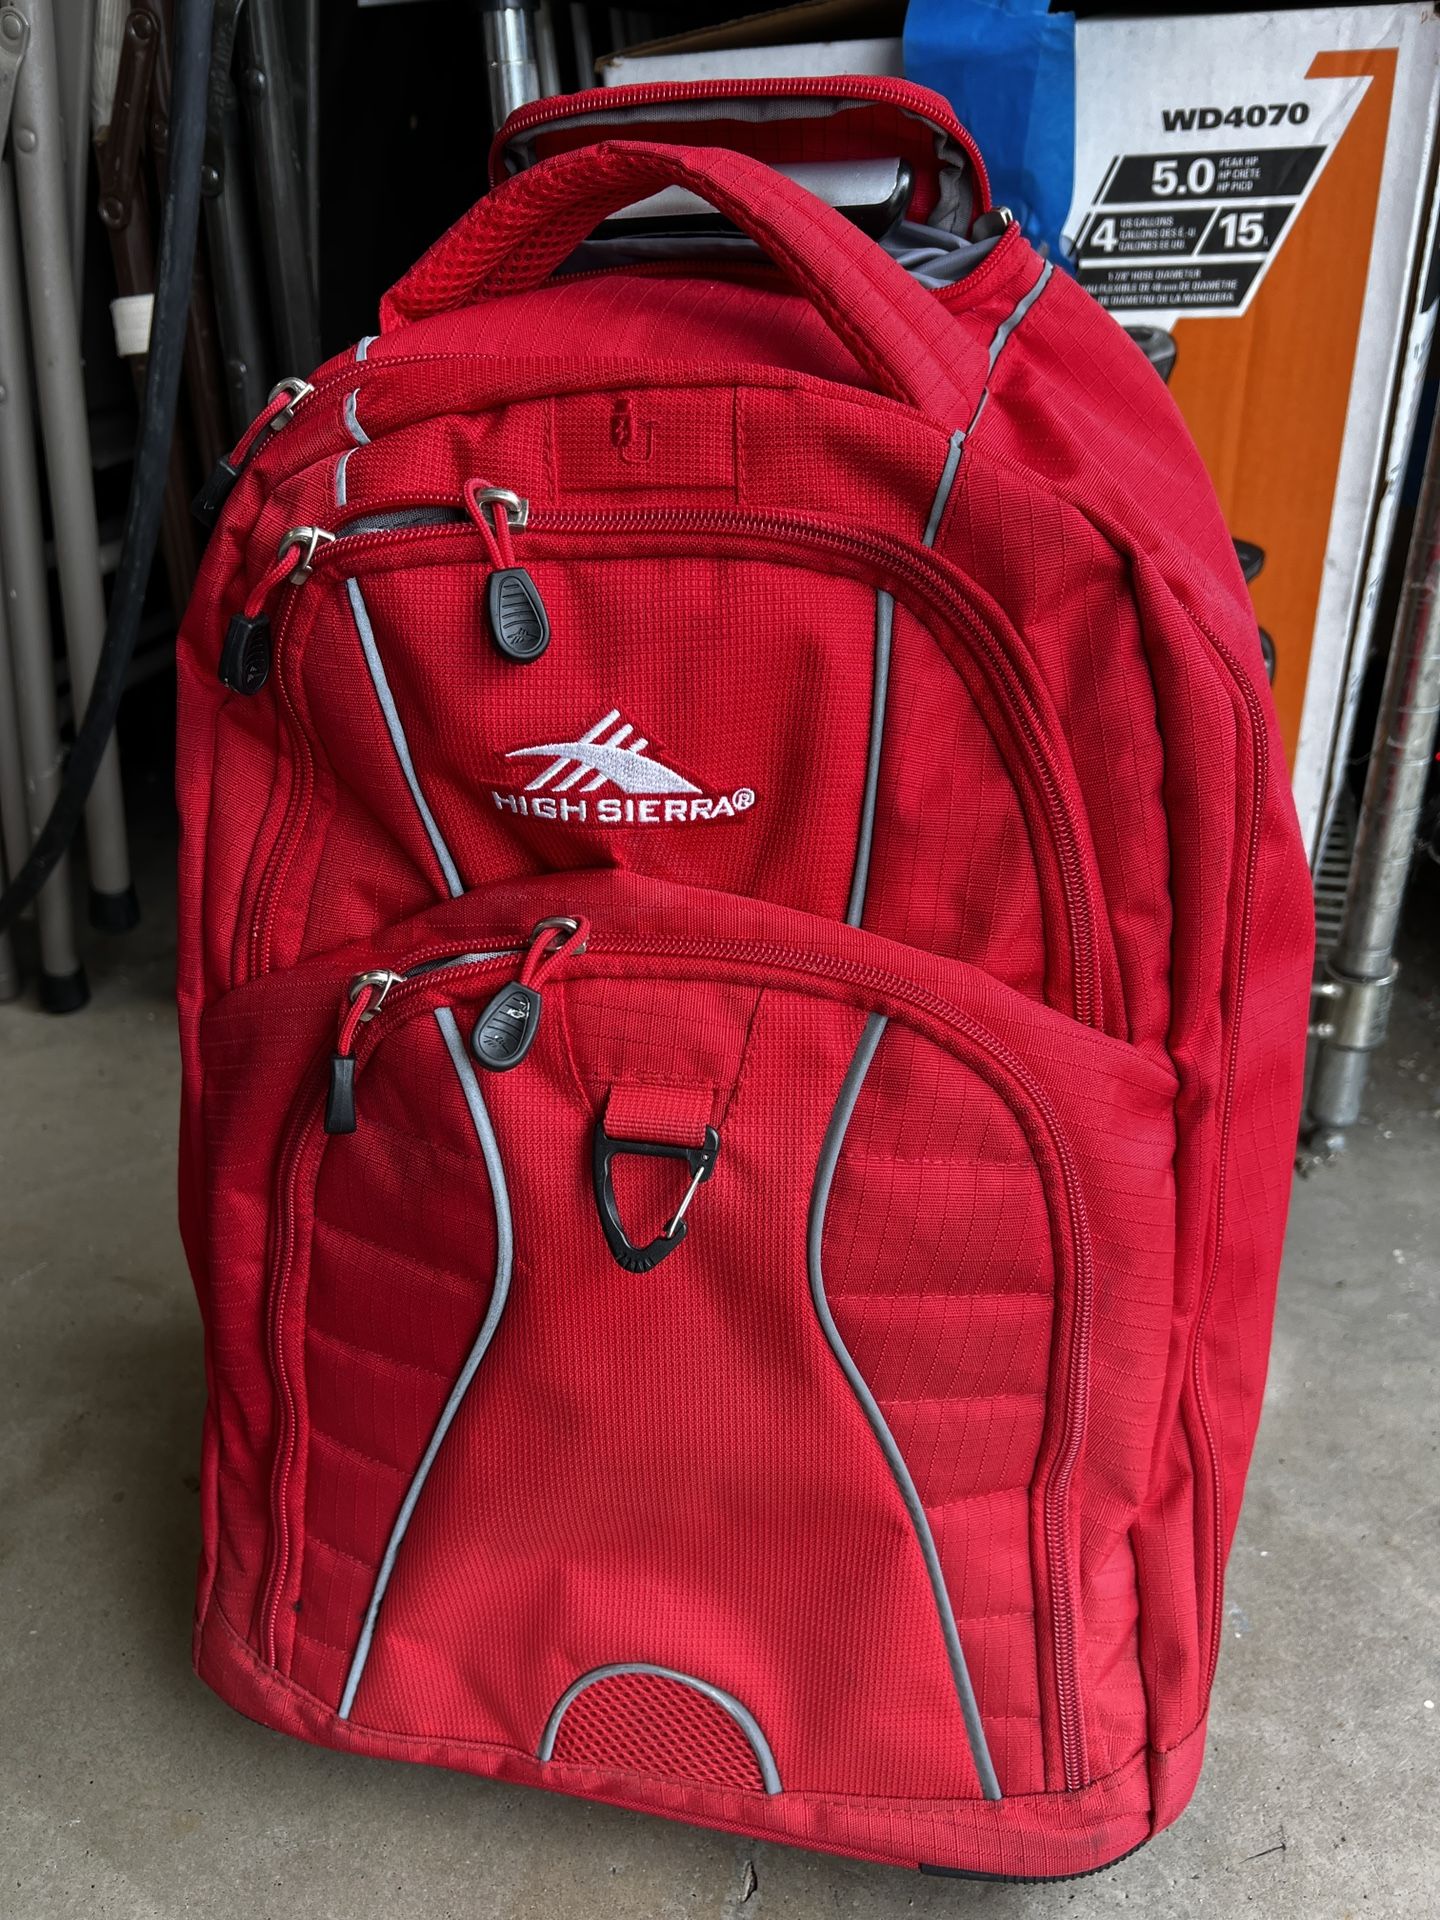 Excellent condition High Sierra Rolling Backpack